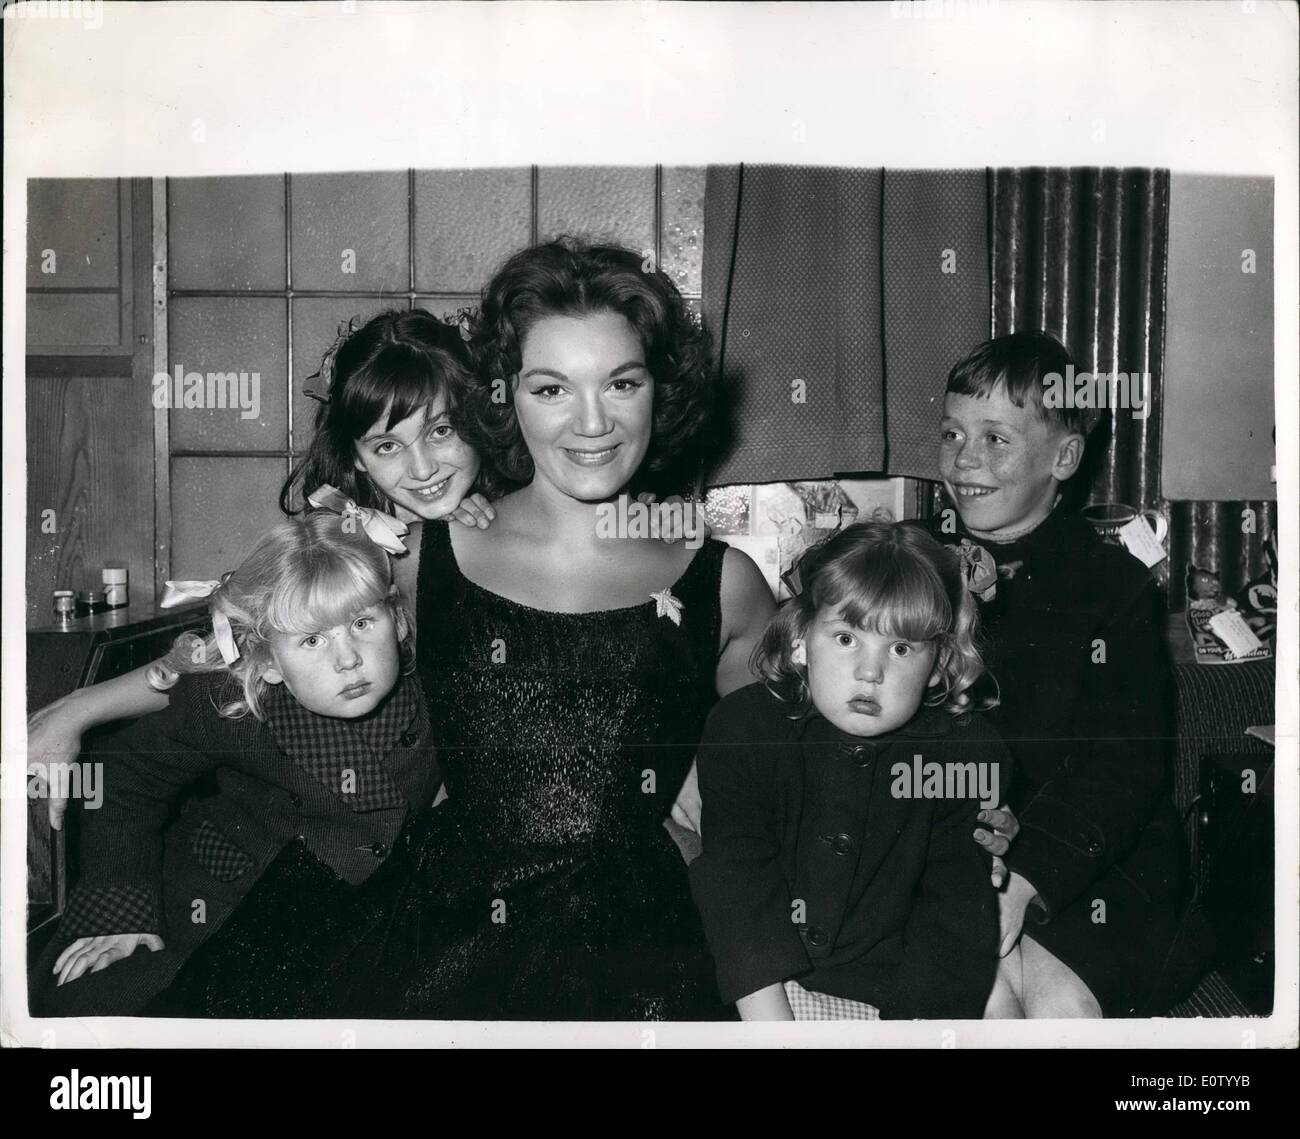 Oct. 10, 1960 - CONNIE FRANCIS AND THE COCKNEY KIDS... SHE WILL PAY FOR A HOLIDAY FOR THEM.. Pop singer Connie Francis was to be seen at the London Palladium yesterday - with four Cockney children Lorraine Woods (10); Alan (9); Valerie (5) and Yvonne (3) between rehearsals for the Sunday Night TV show.. This followed the announcement by her publicity agent that she was to have four cockney children as 'mascots' and that she would 'kinda adopt one of them... pay its way' ..... Stock Photo